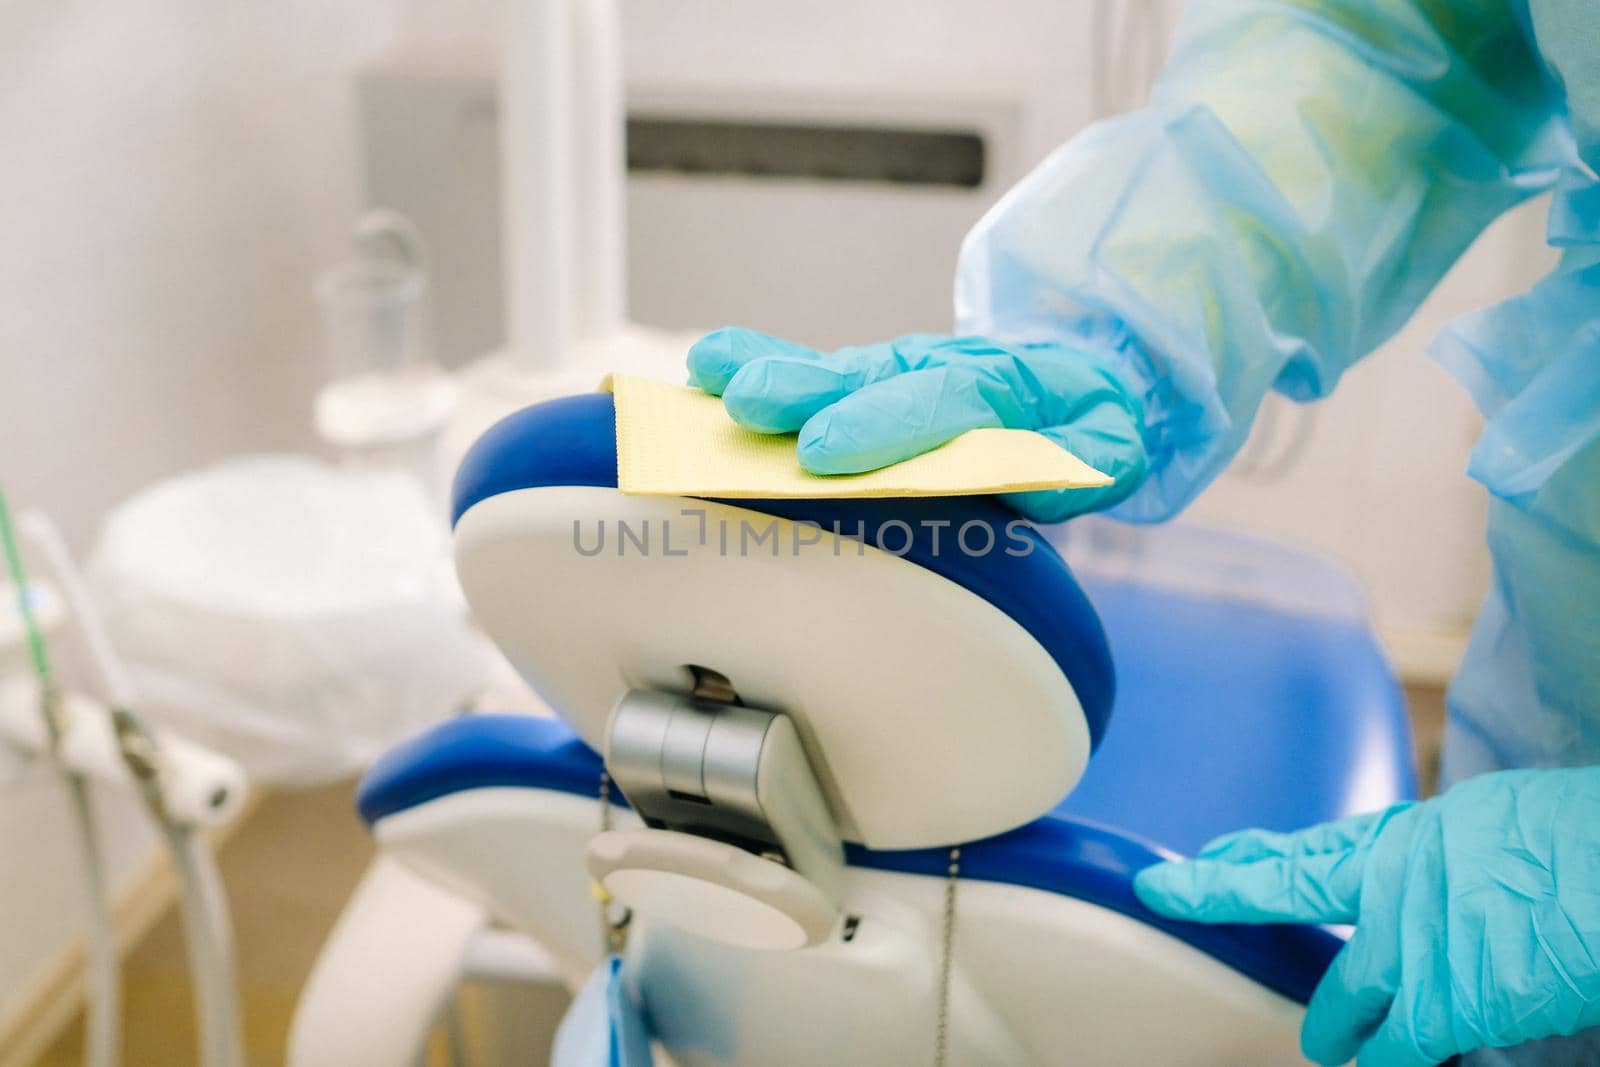 A nurse disinfects work surfaces in the dentist's office. by Lobachad